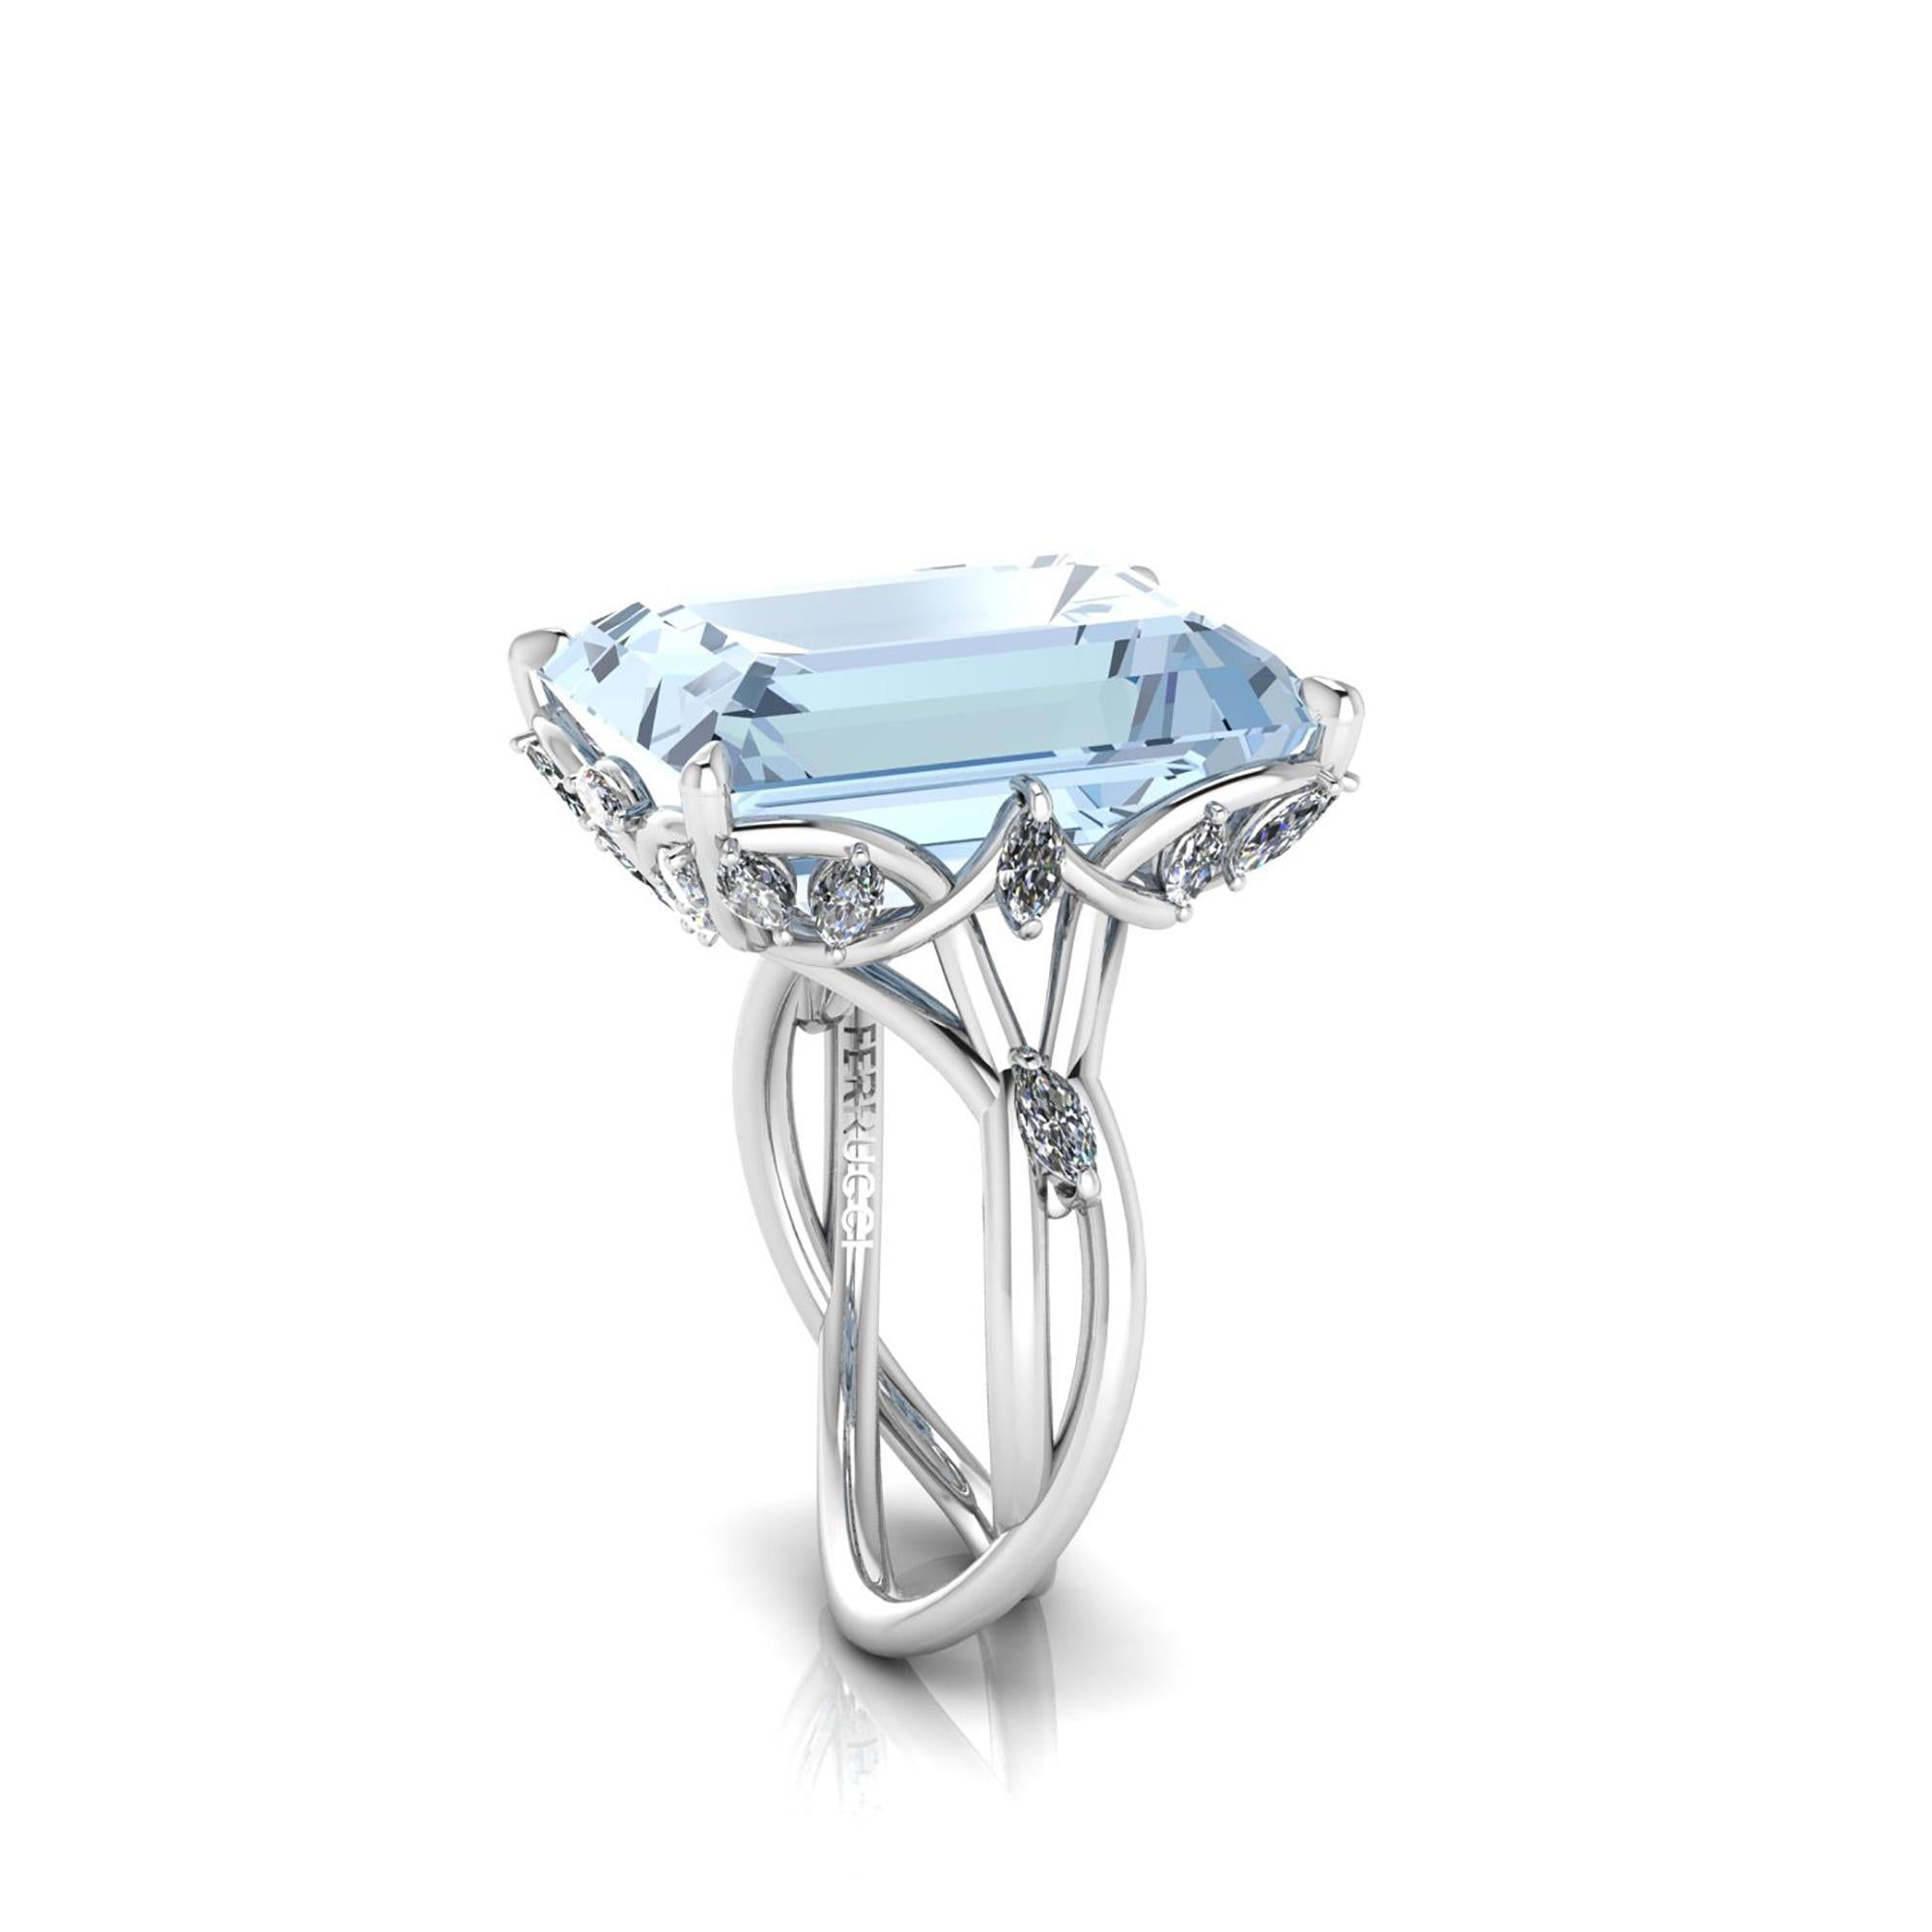 14.69 carat emerald cut Aquamarine, with bright white diamonds for an approximate carat weight of 0.70 carat, Marquise cut, set in a delicate and sophisticated looking Platinum 950 ring, conceived with the best Italian manufacturing.

This ring is